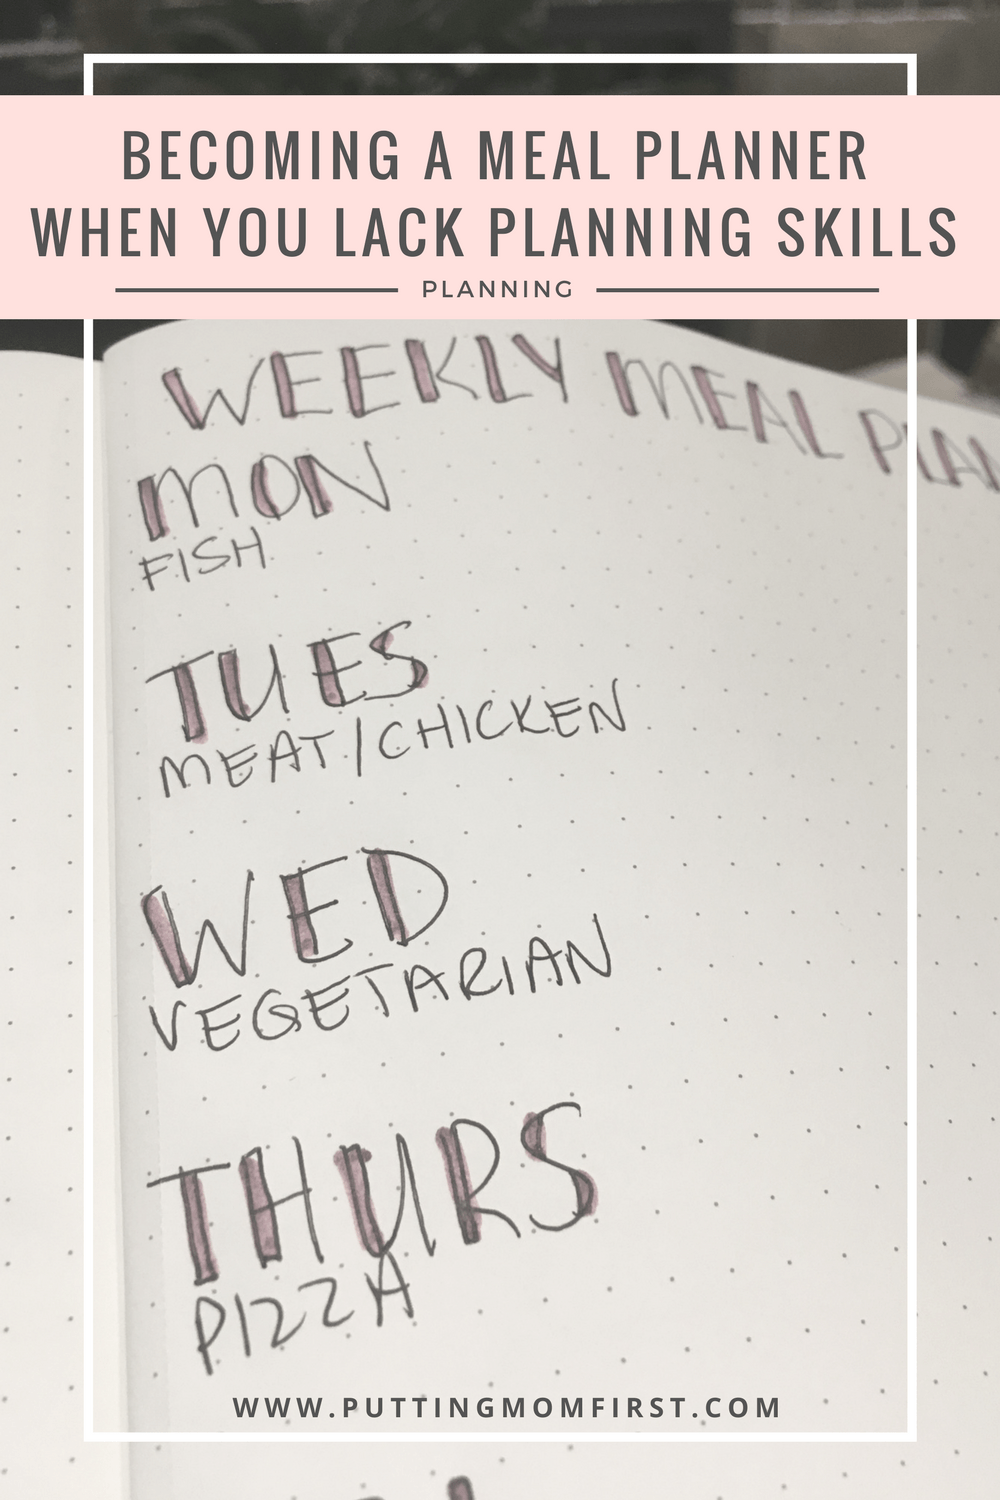 Becoming a meal planner when you lack planning skills